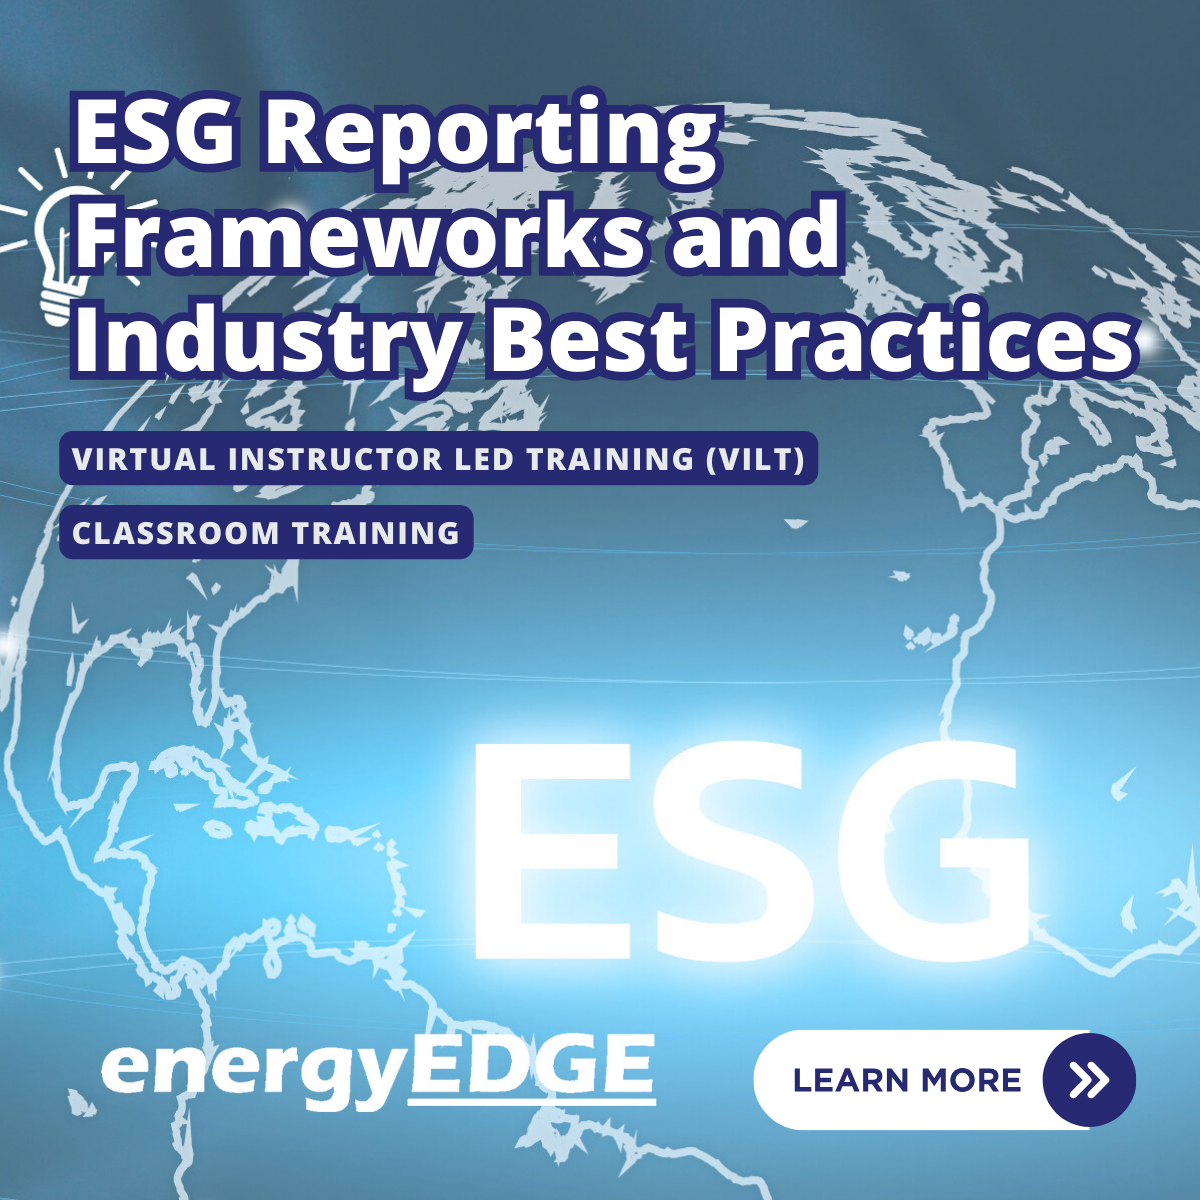 ESG Reporting Frameworks & Industry Best Practices – Comprehensive Analysis & Latest Developments On ESG Reporting Standards